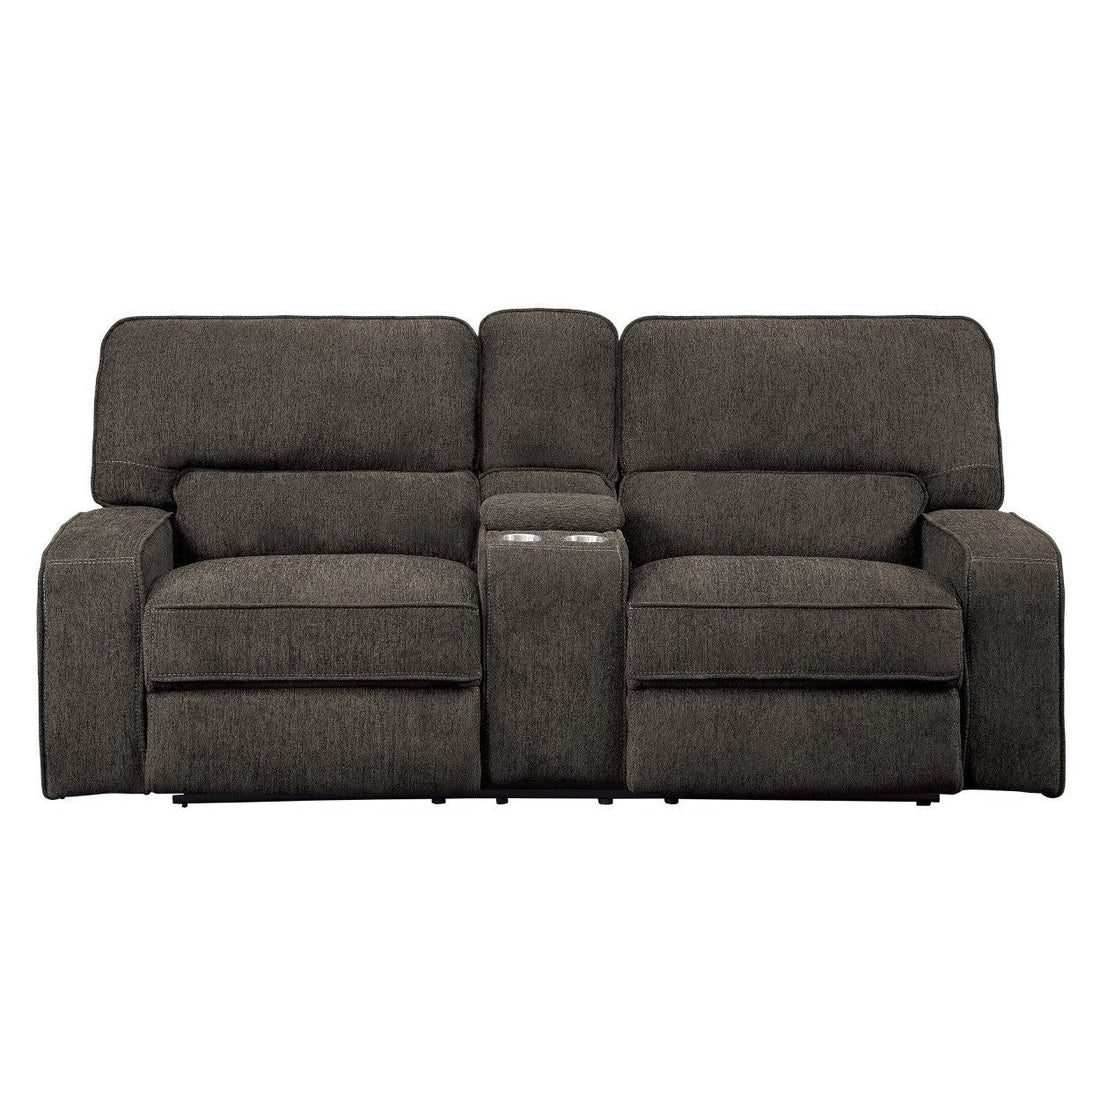 POWER DOUBLE RECLINING LOVE SEAT WITH CENTER CONSOLE, POWER HEADRESTS &amp; USB PORTS, CHOCOLATE 100% POLYESTER 9849CH-2PWH